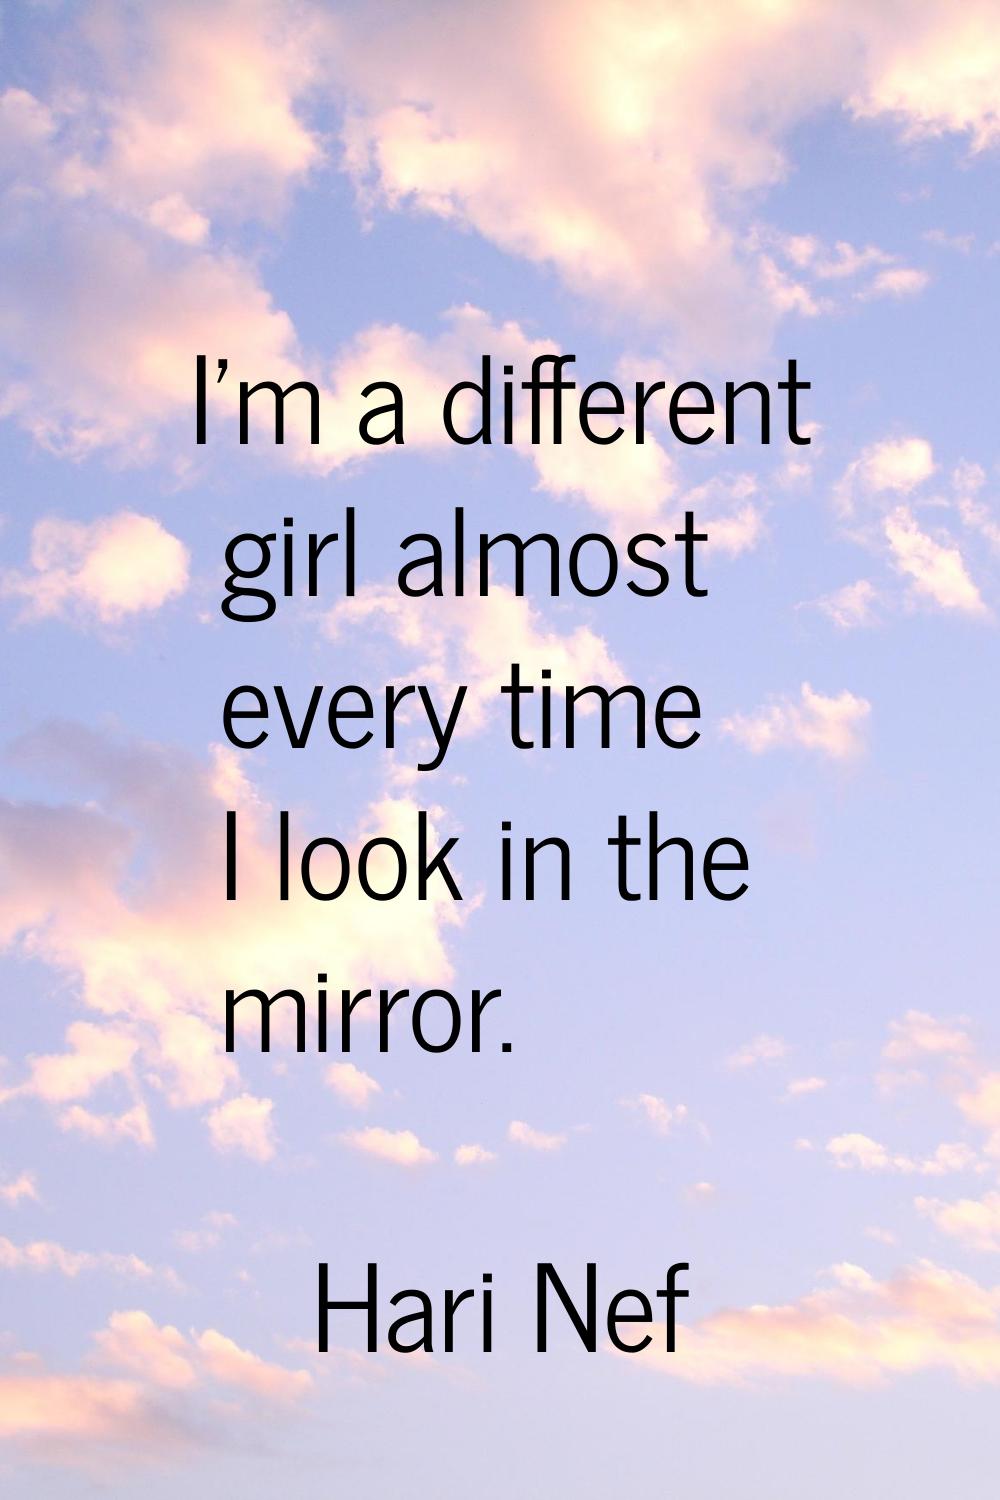 I'm a different girl almost every time I look in the mirror.